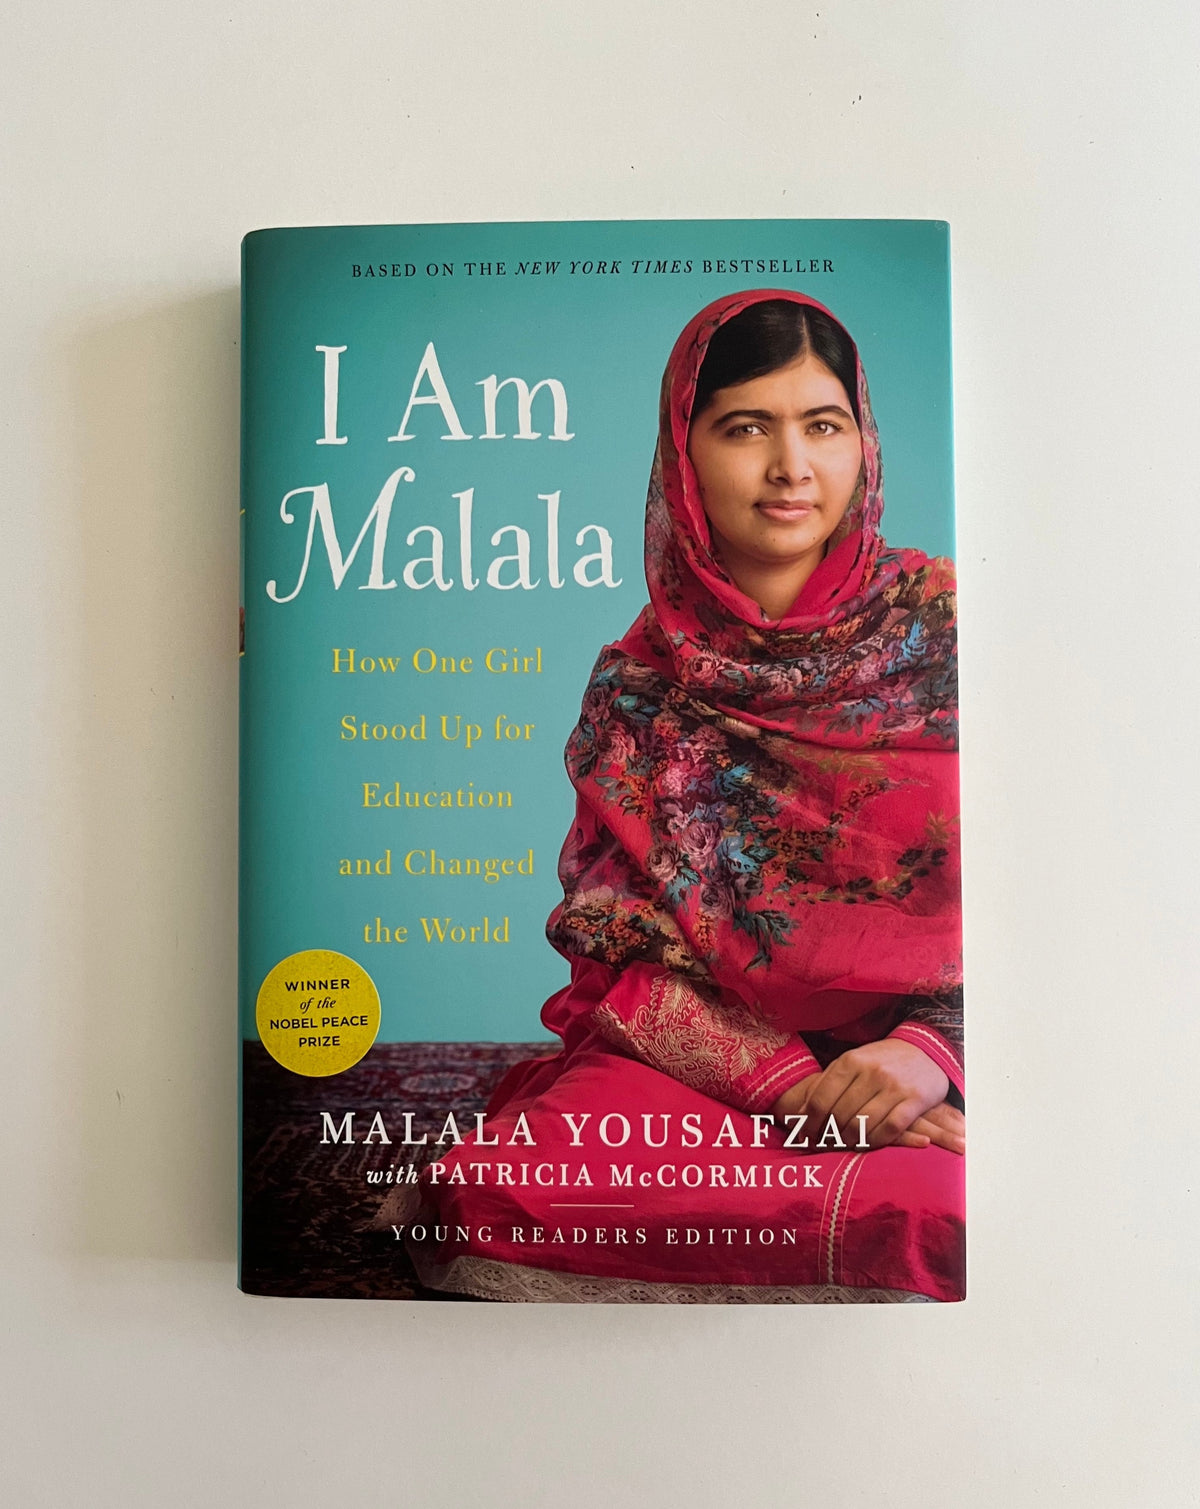 I Am Malala: How One Girl Stood Up for Education and Changed the World by Malala Yousafzai